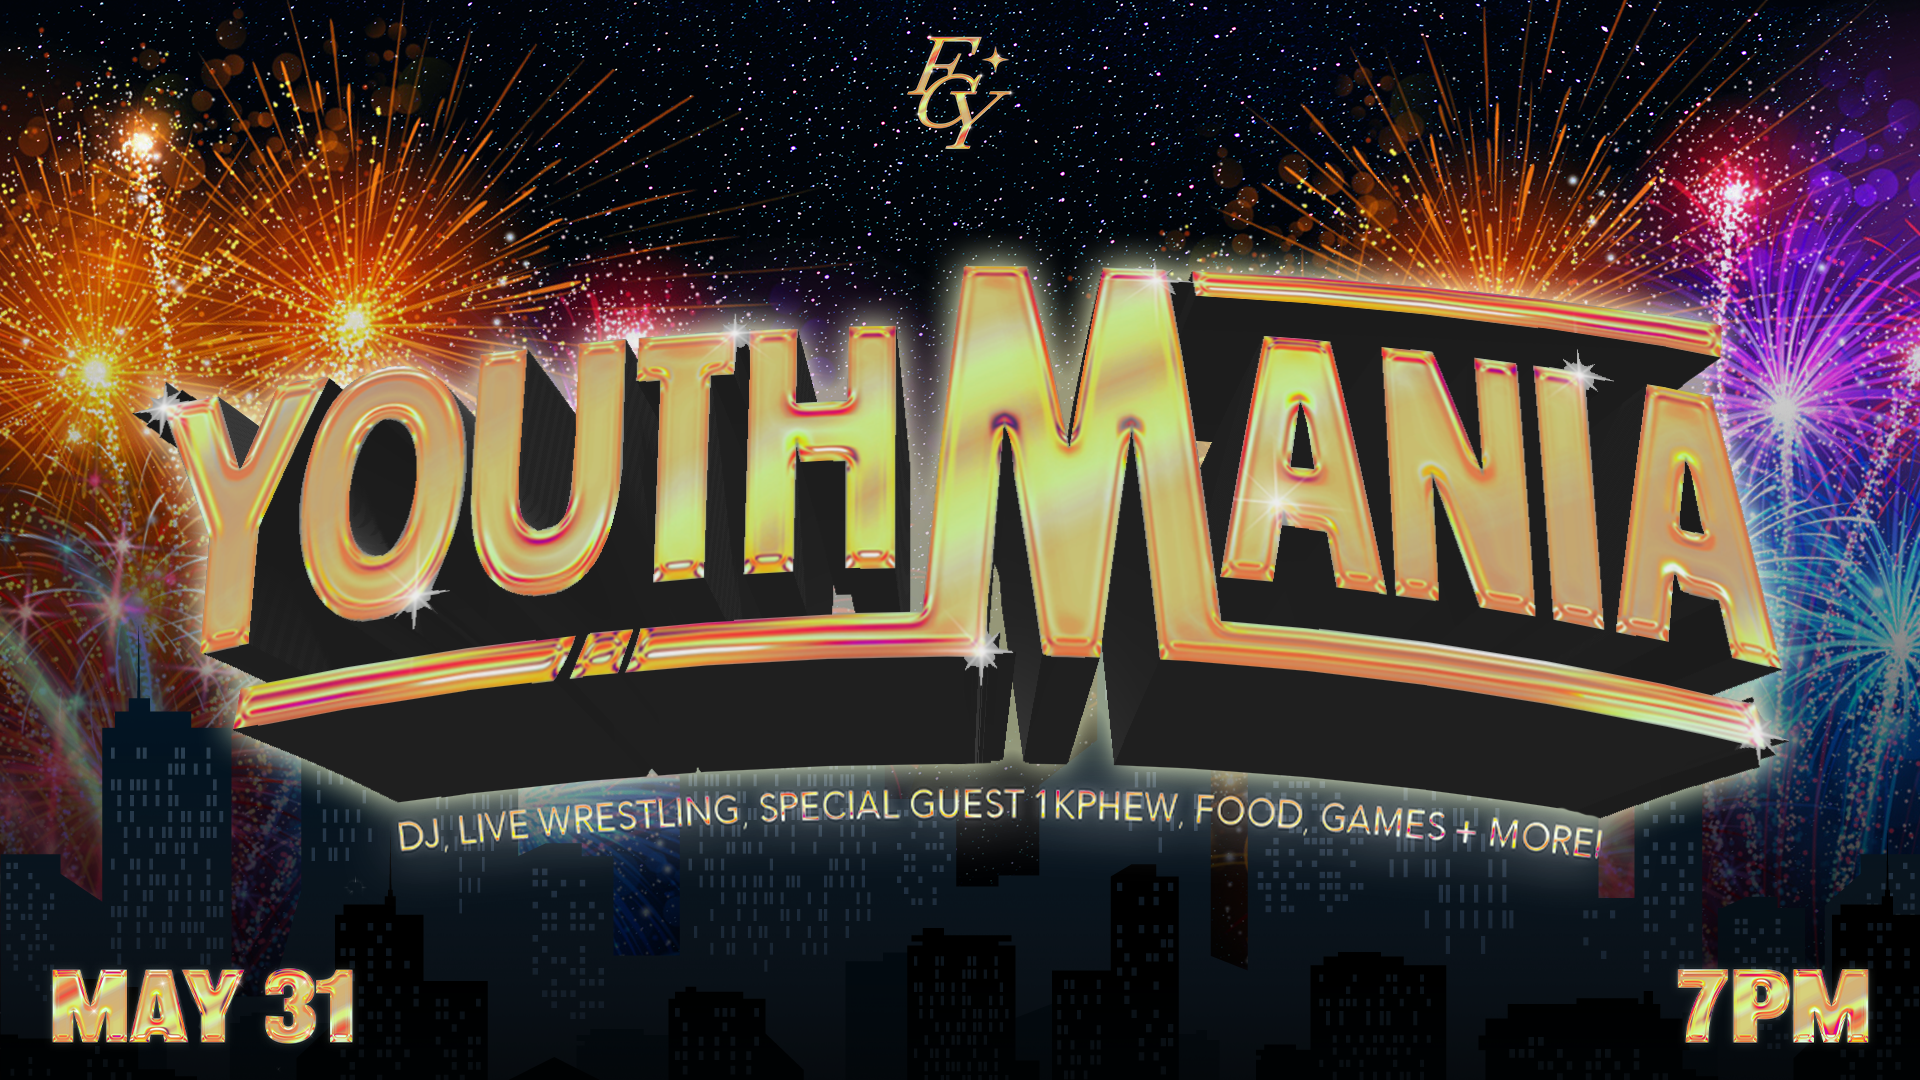 FCY United Night: YOUTHMANIA at the Gwinnett campus